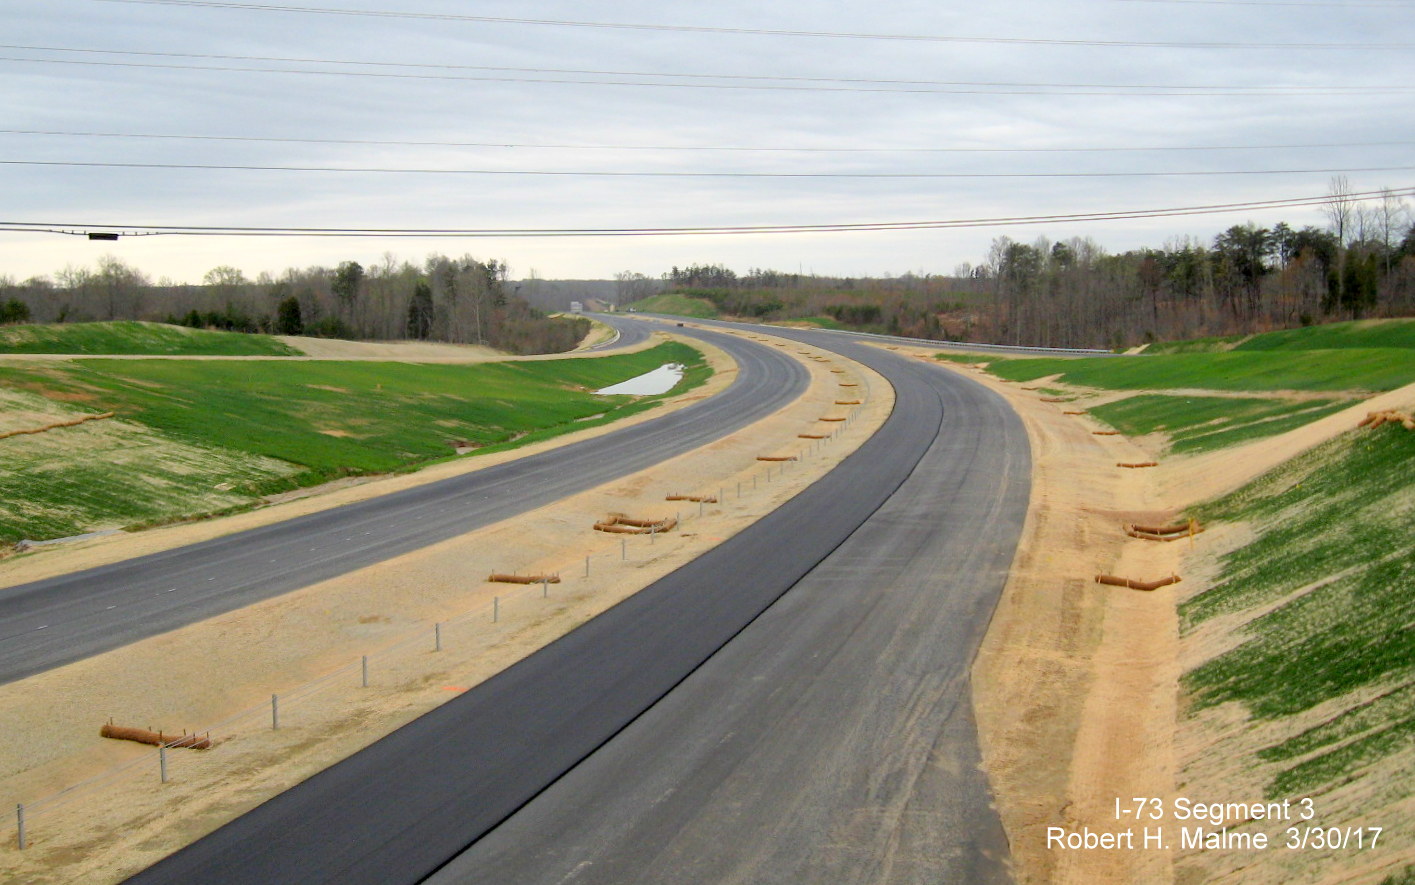 Image taken of view south from NC 150 bridge over future I-73 lanes under construction in Guilford County